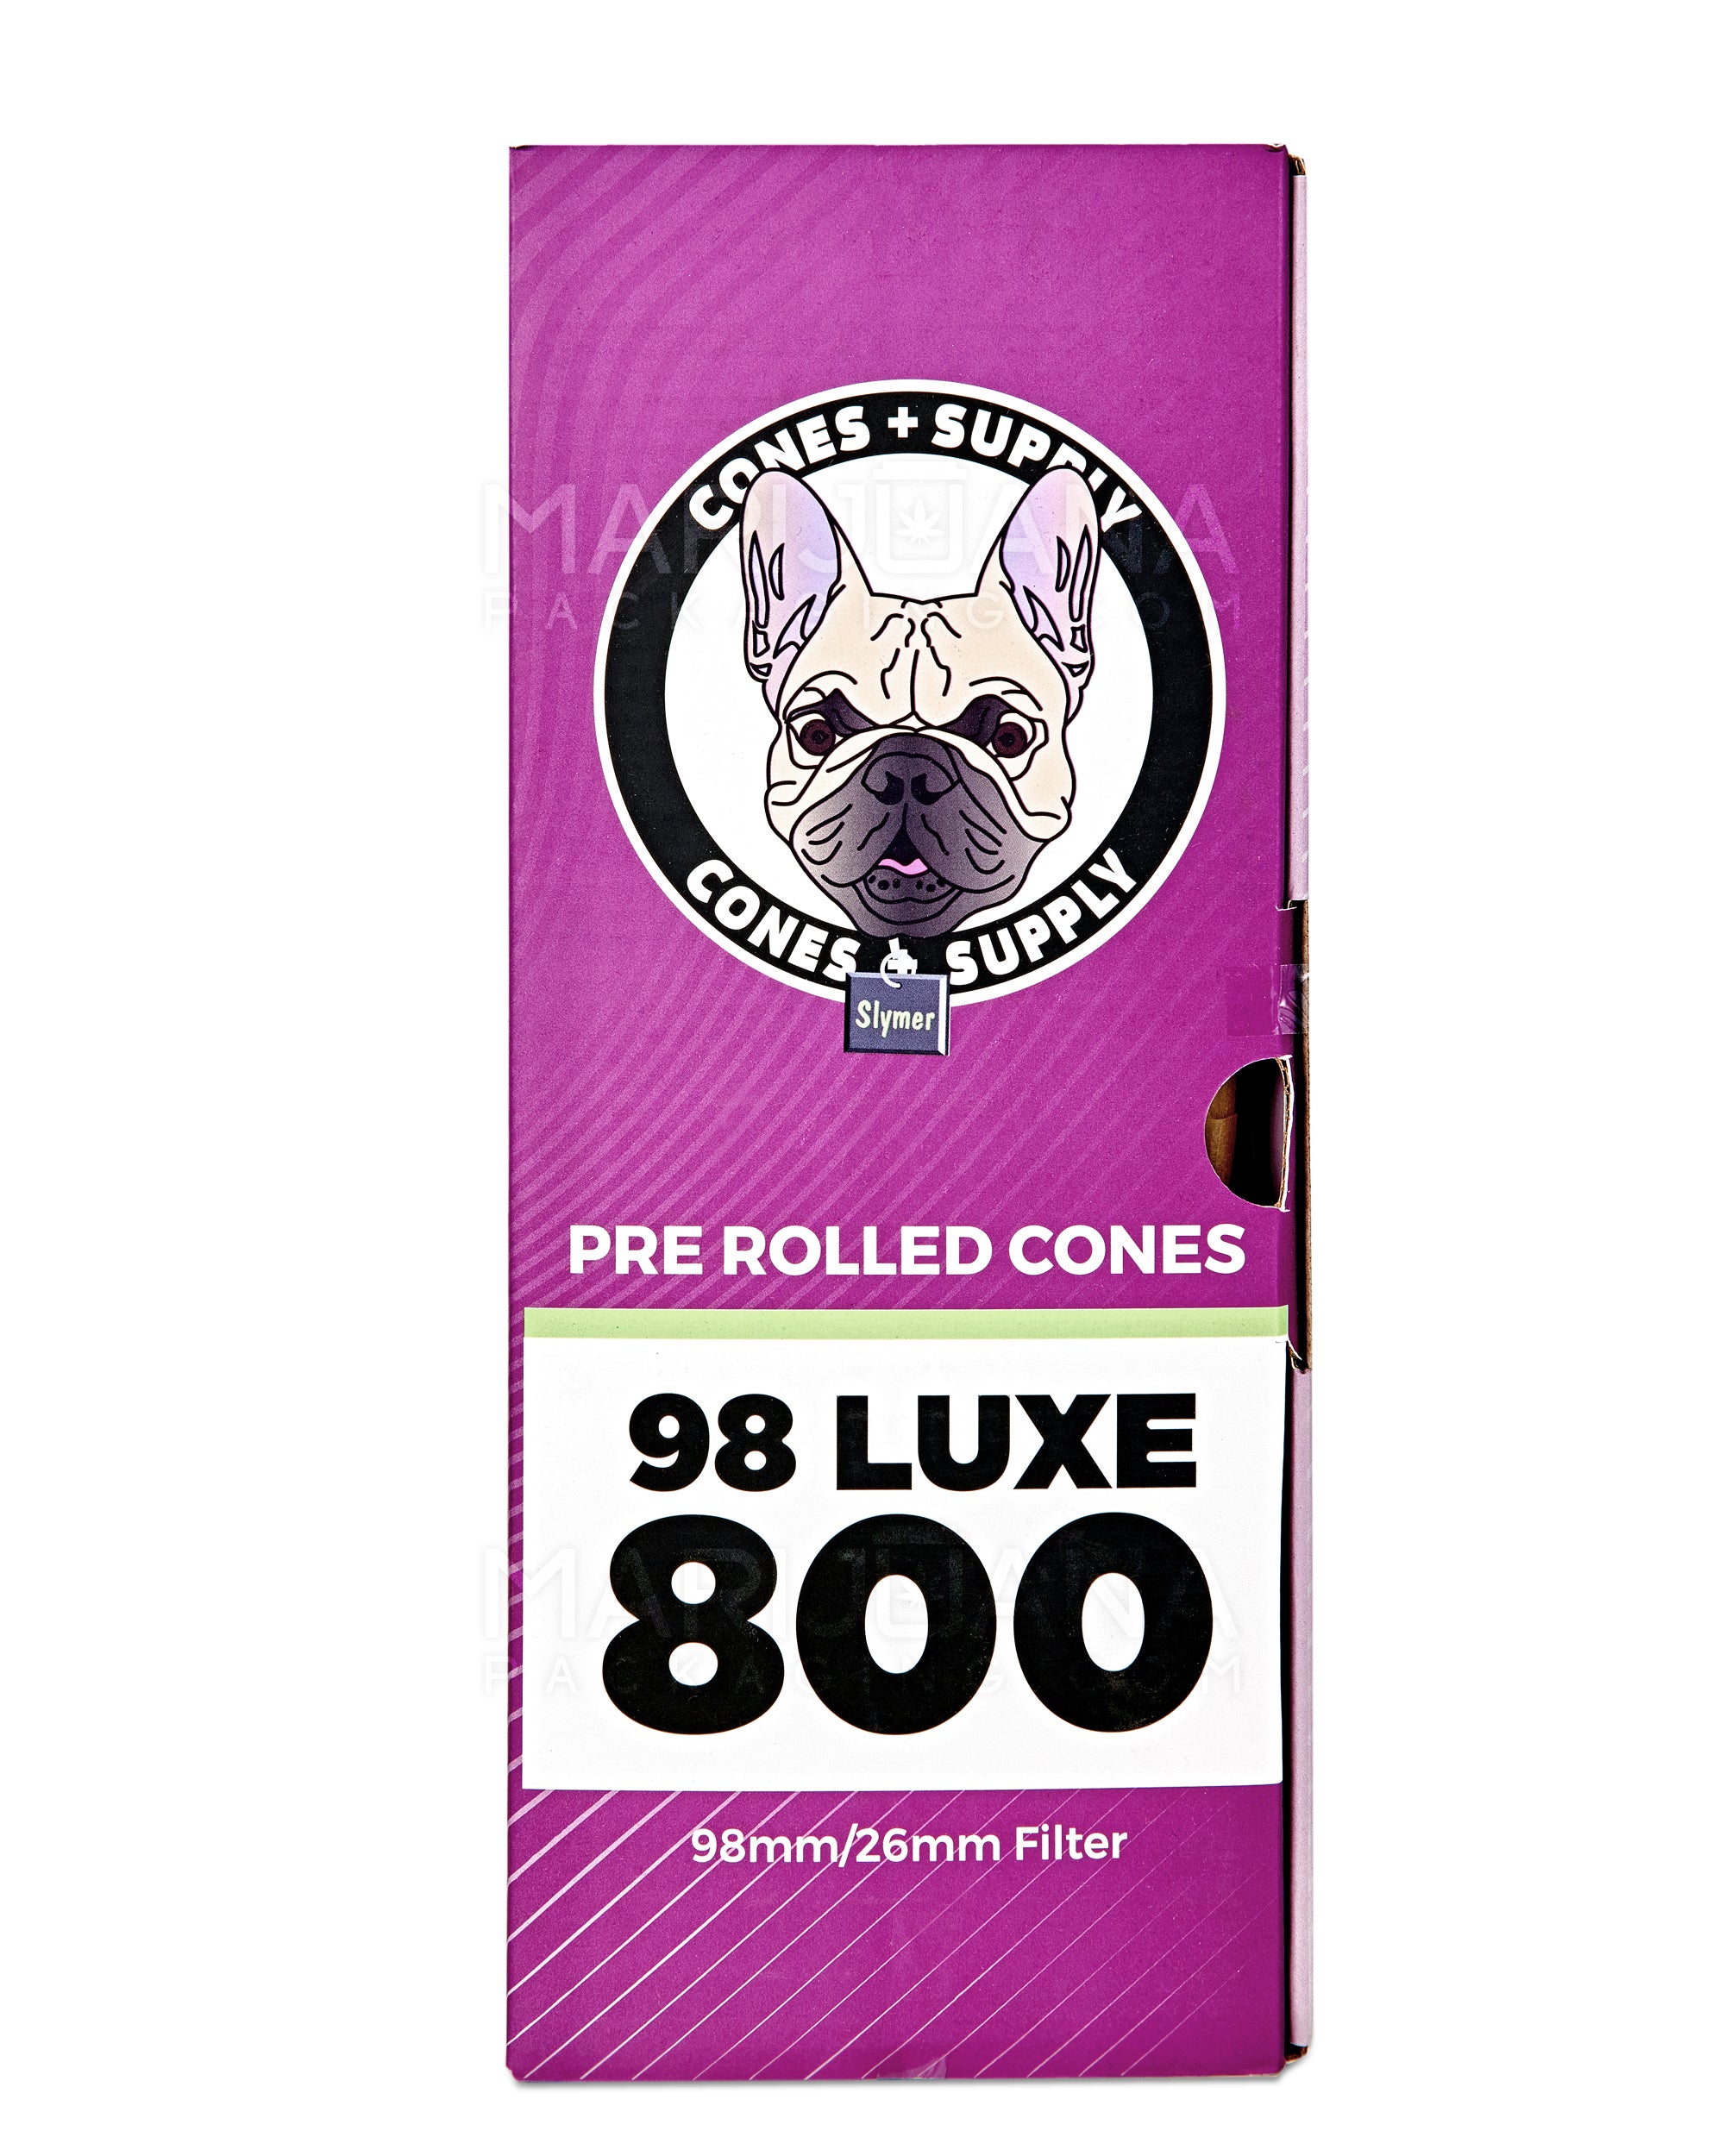 CONES + SUPPLY | 98 Luxe Natural Pre-Rolled Cones | 98mm - Unbleached Paper - 800 Count - 5